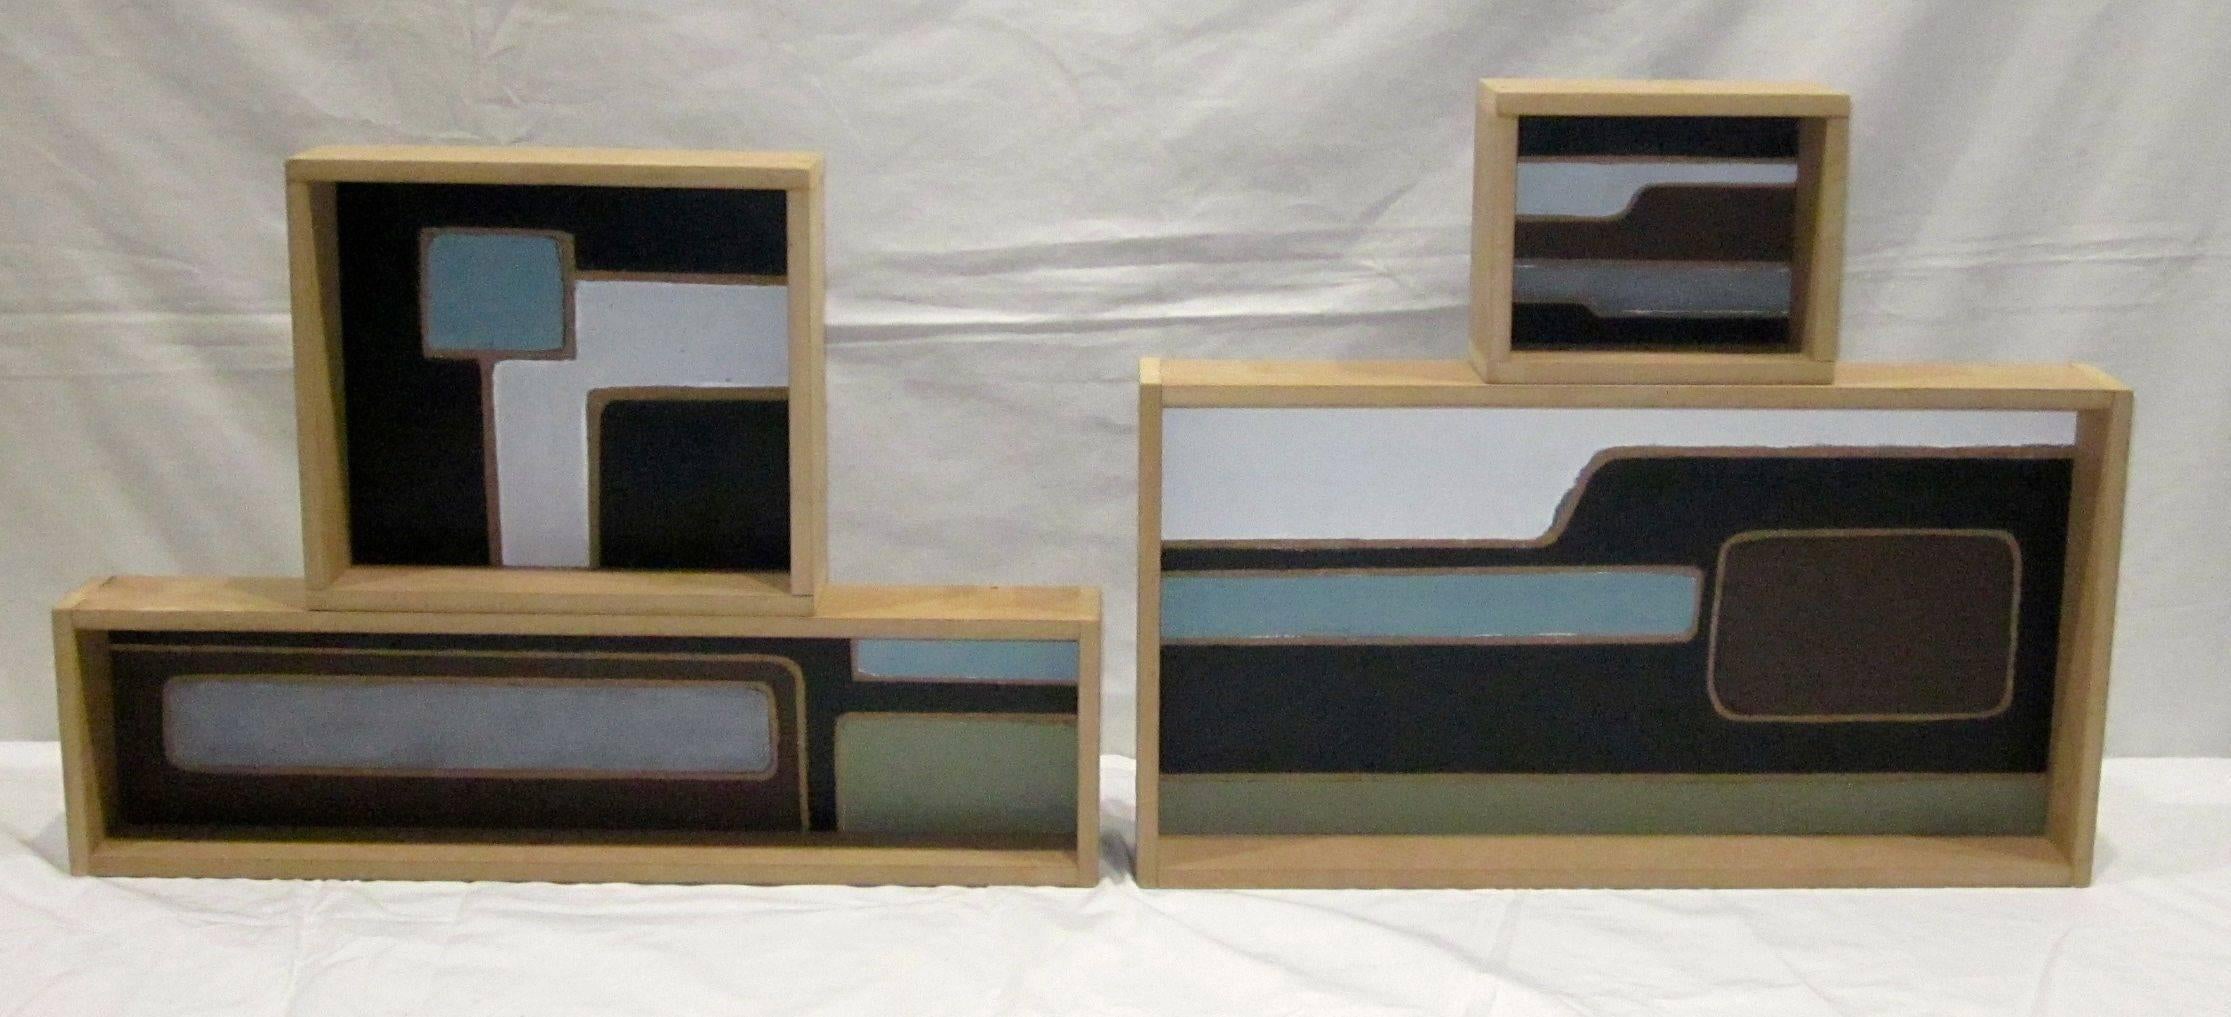 French artist Pierre Malbec has created a collection of small abstract acrylic paintings.
The paintings are in light wooden frames which make the paintings appear to be in boxes.
The variety of sizes range from 6